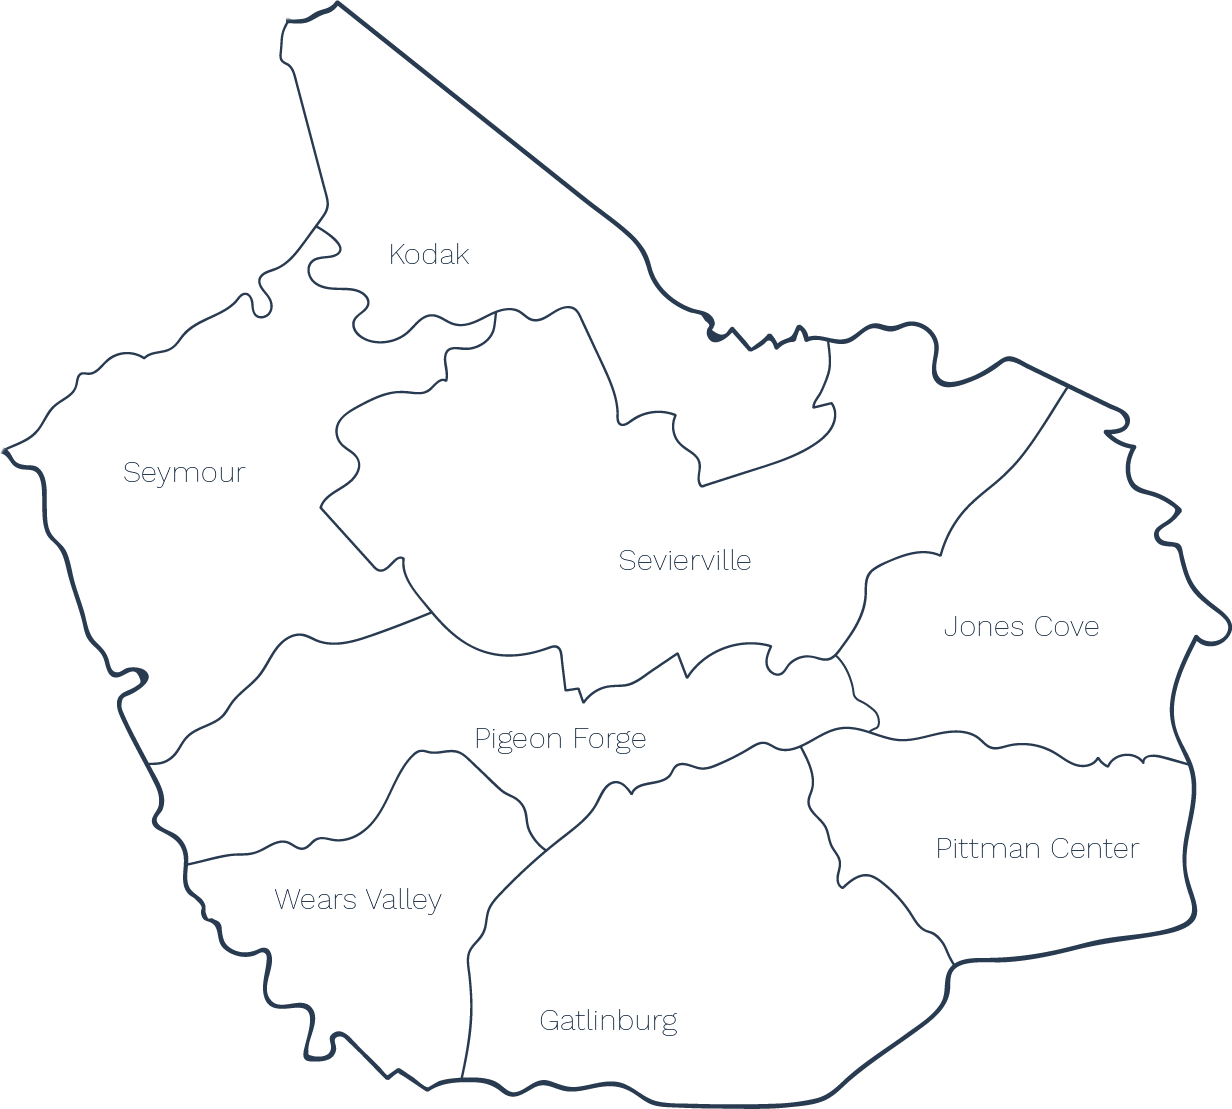 Gray blue outline of the communities in the Smokies